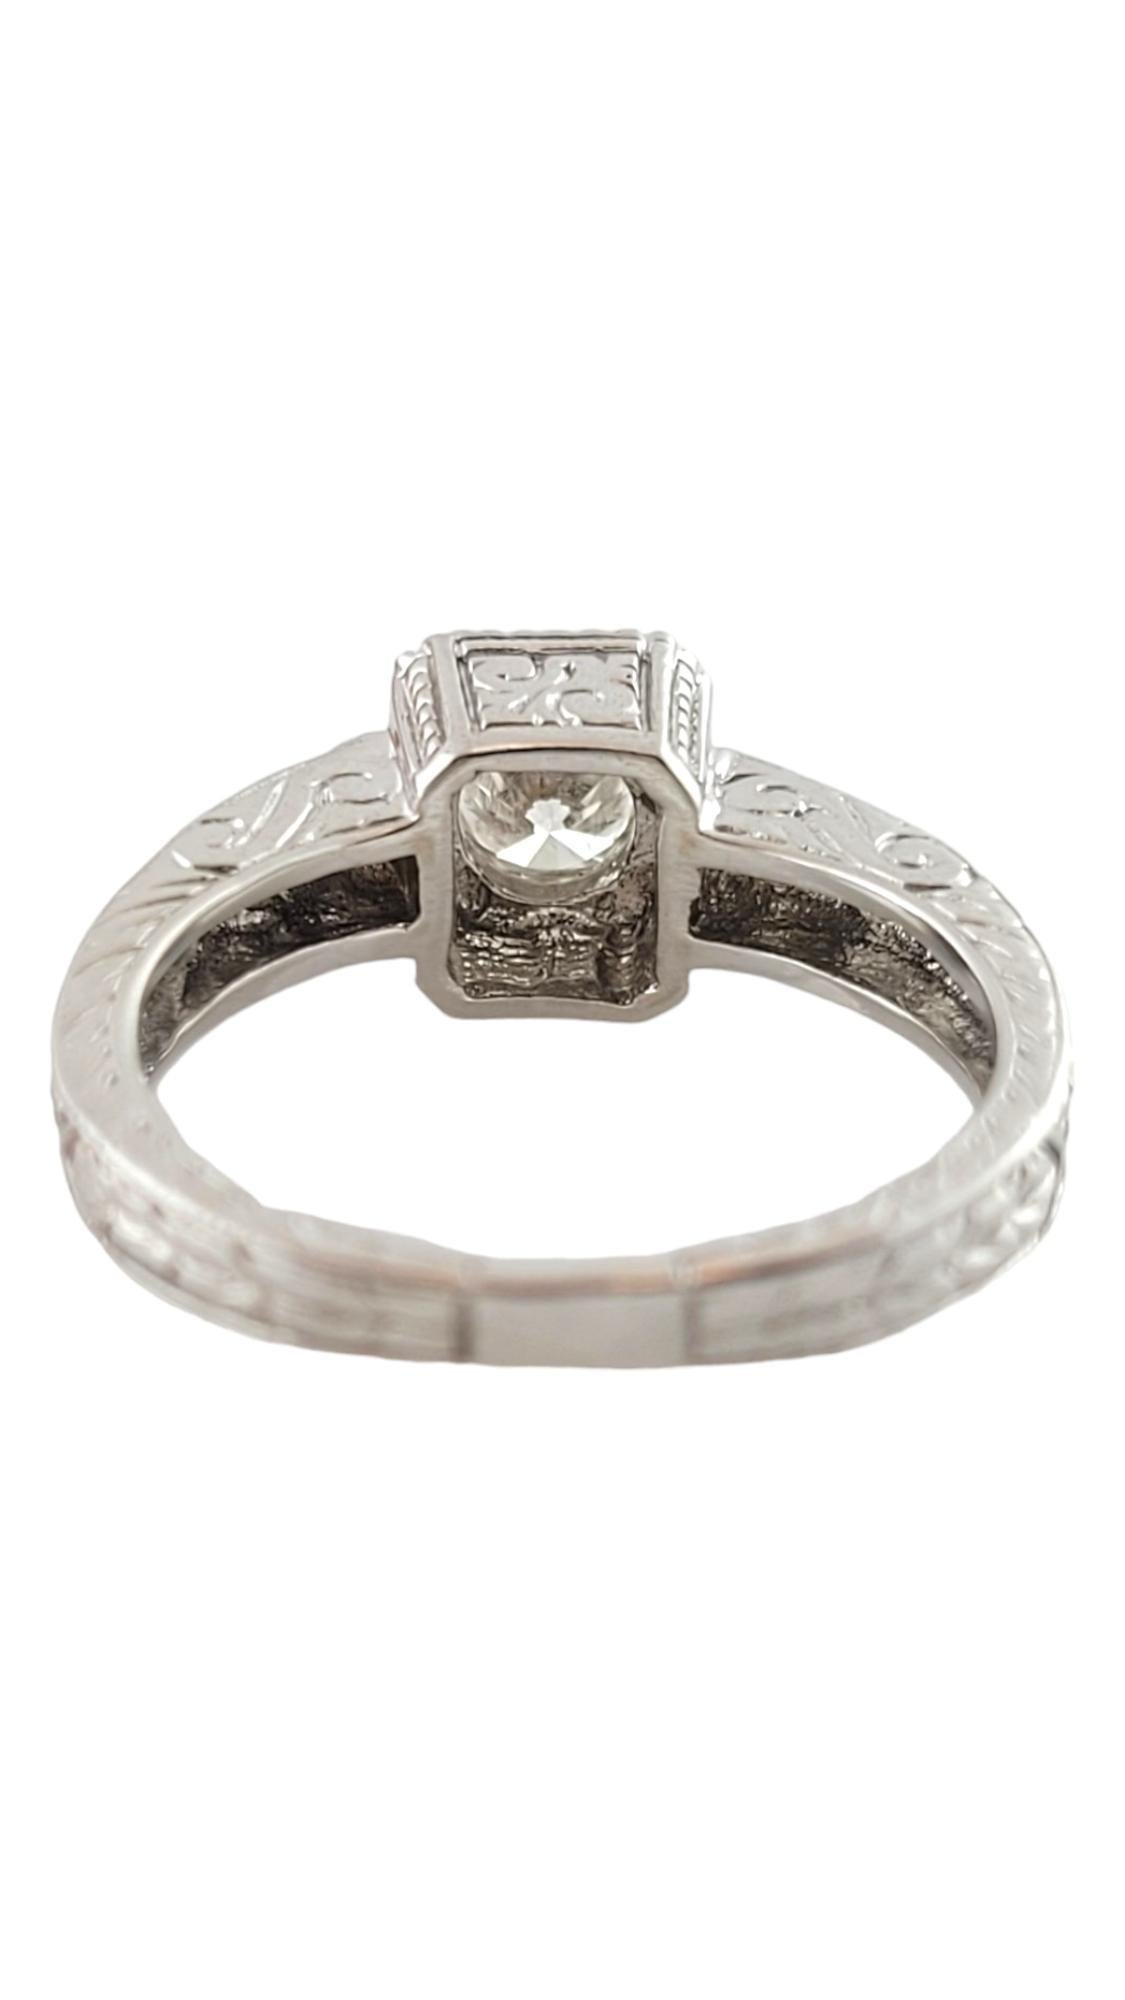 18 Karat White Gold Diamond Engagement Ring Size 5.5 #16960 In Good Condition For Sale In Washington Depot, CT